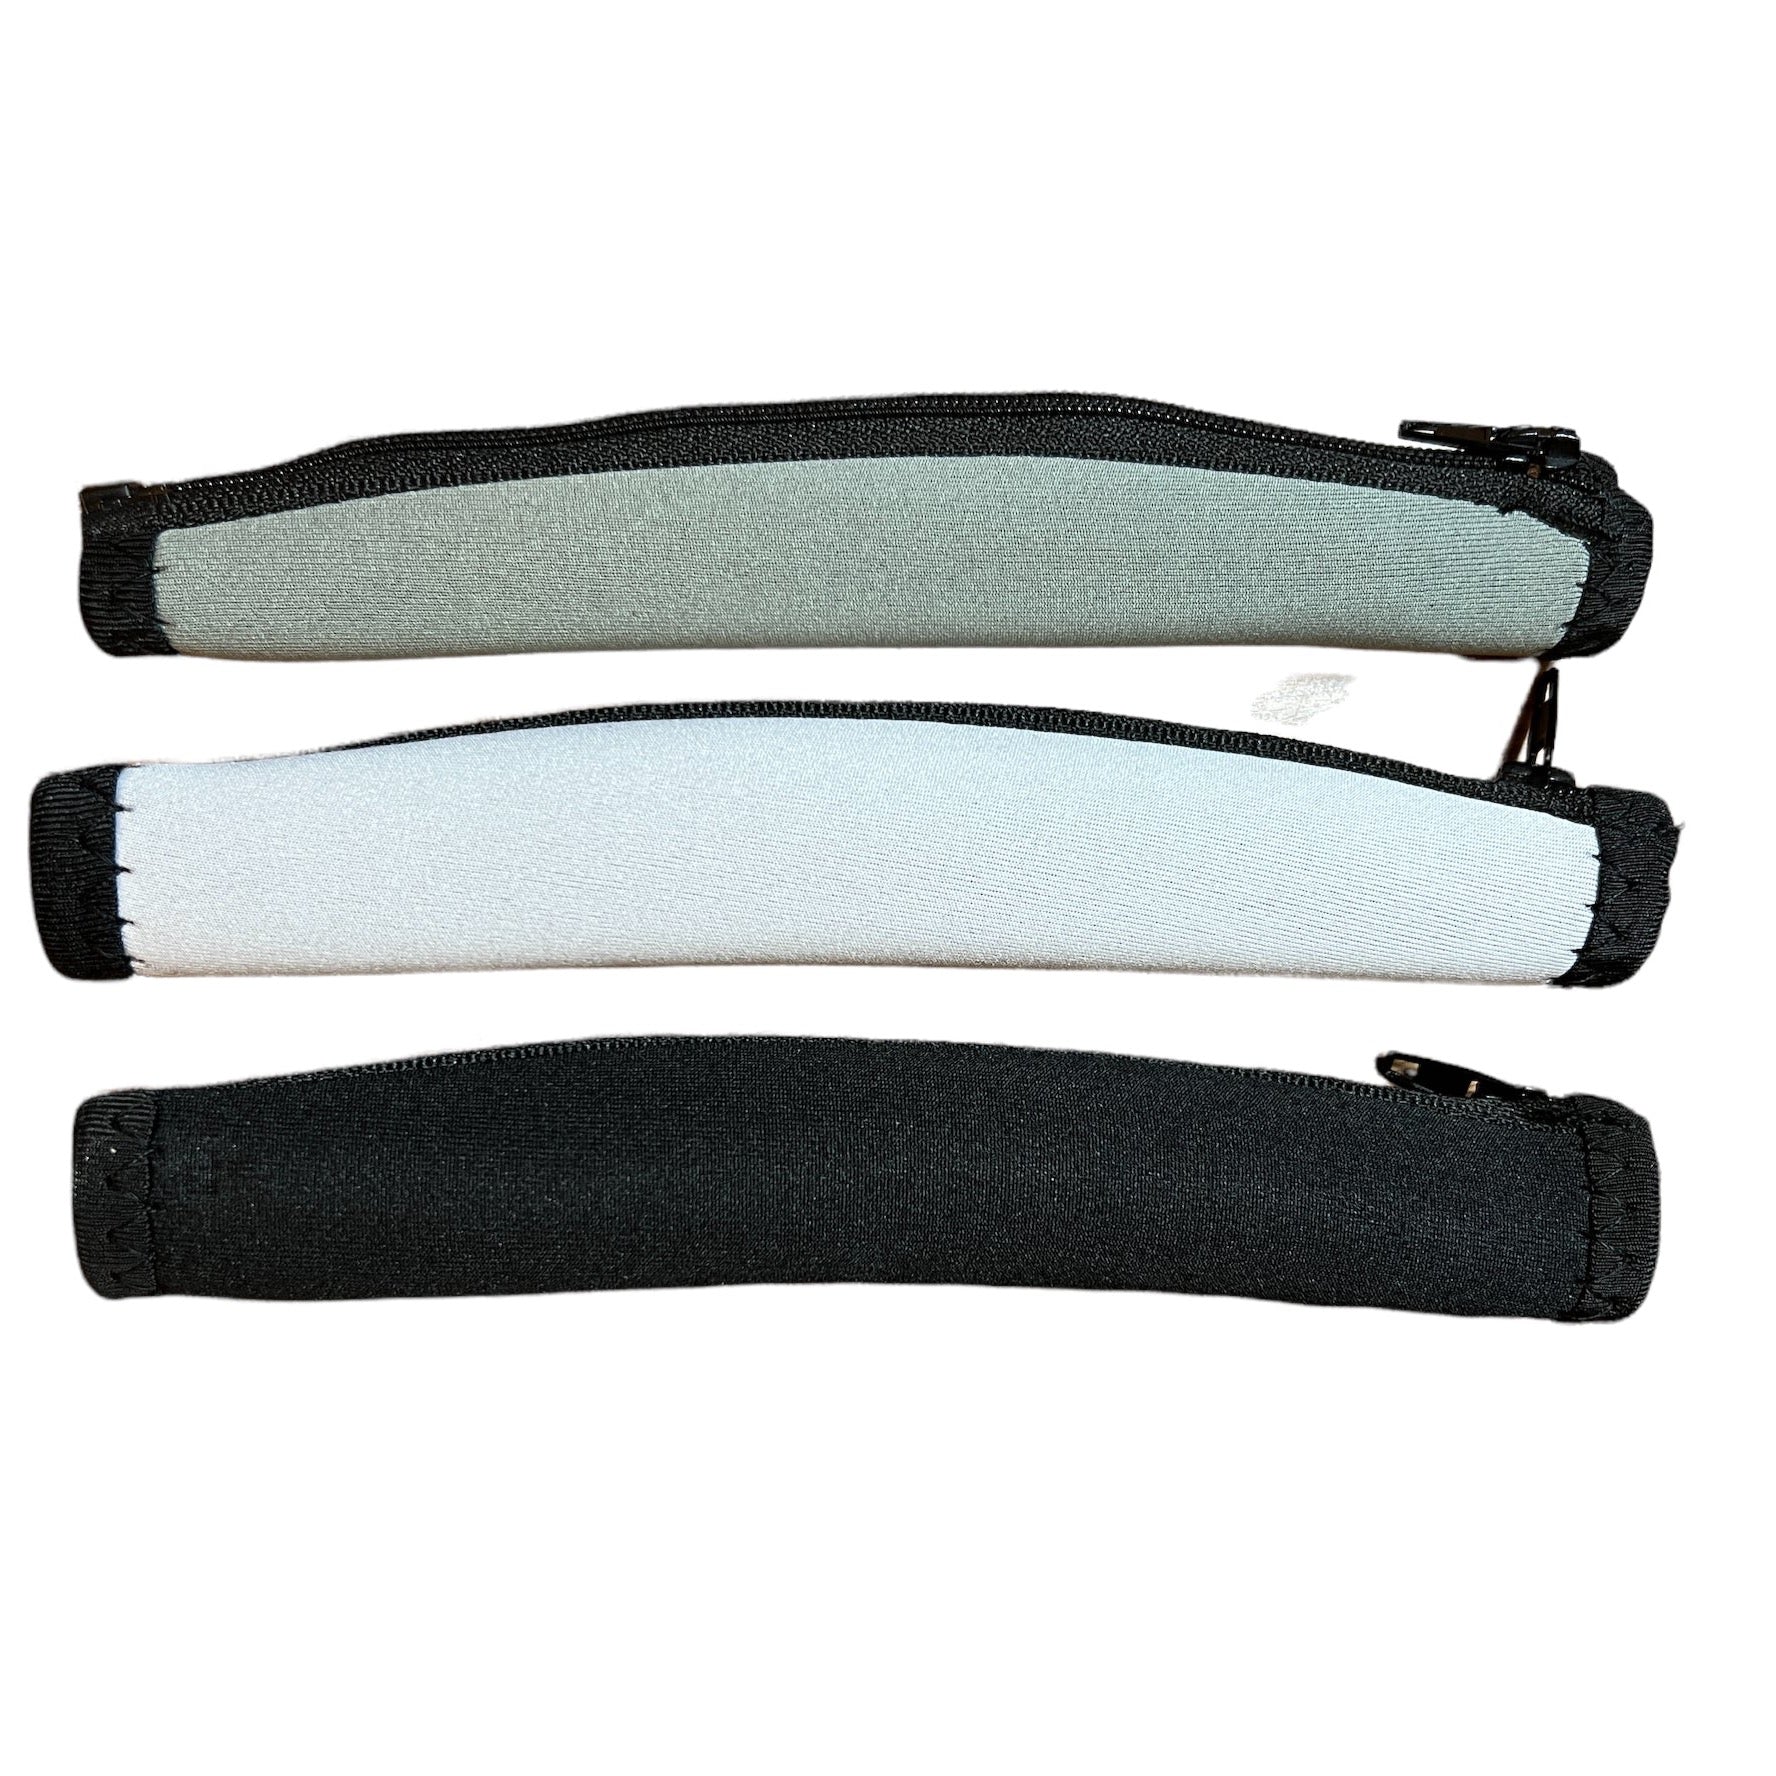 CentralSound Universal Neoprene Headband Pad Cover Part for Headphones and Headsets - CentralSound